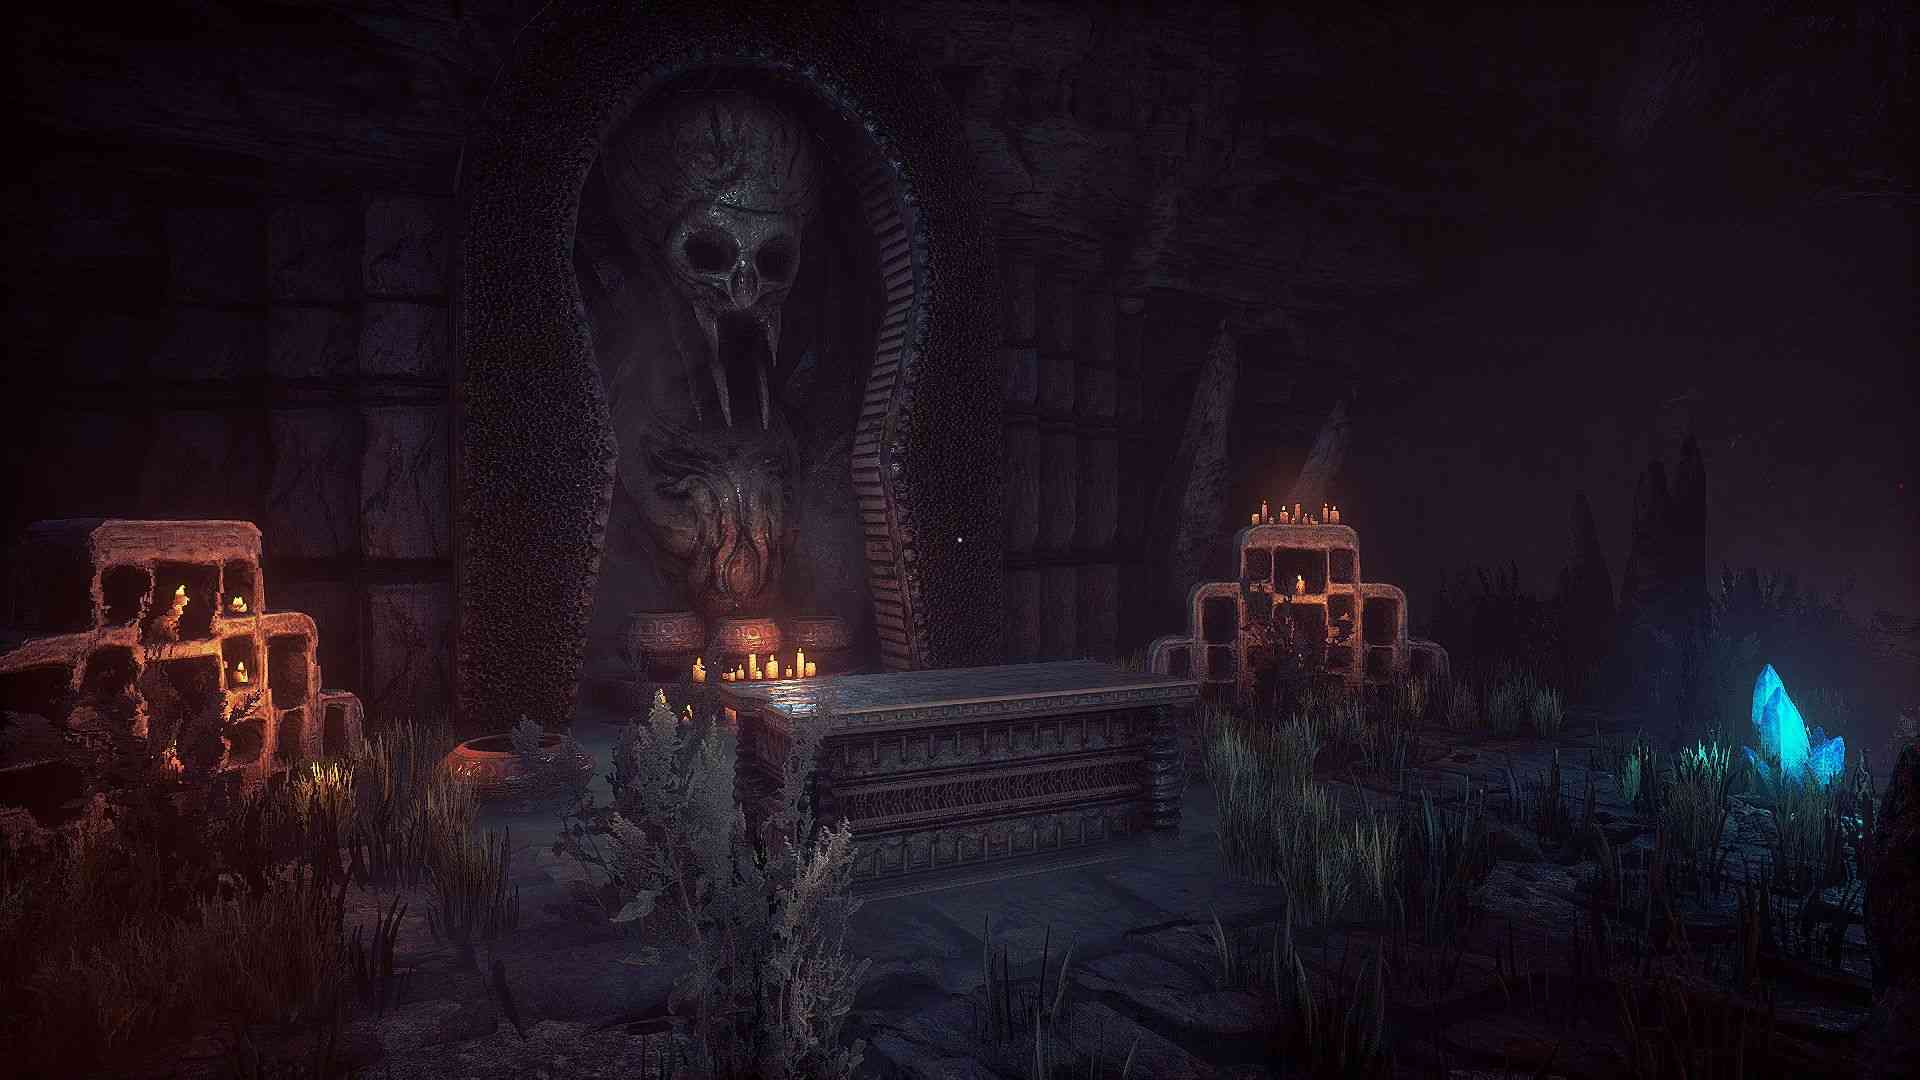 conarium release date has revealed for playstation 4 and xbox one 1452 big 1